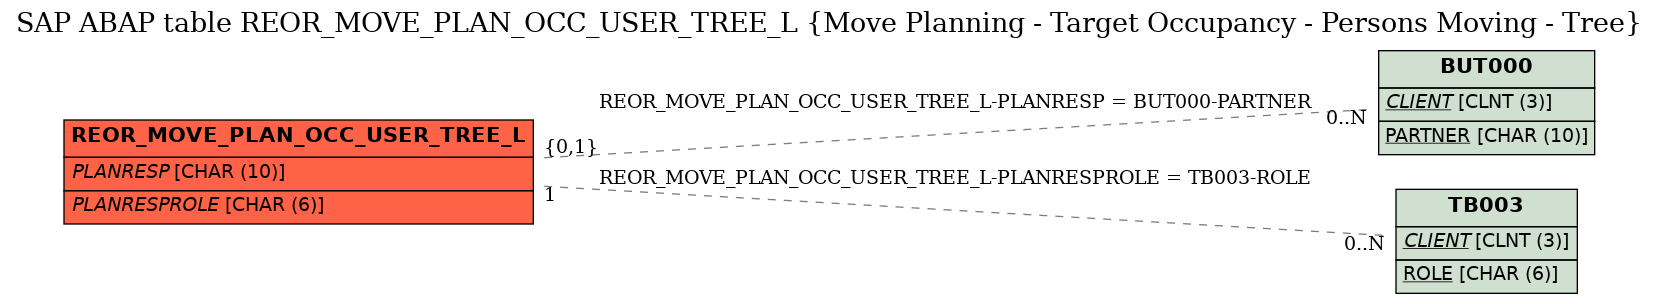 E-R Diagram for table REOR_MOVE_PLAN_OCC_USER_TREE_L (Move Planning - Target Occupancy - Persons Moving - Tree)